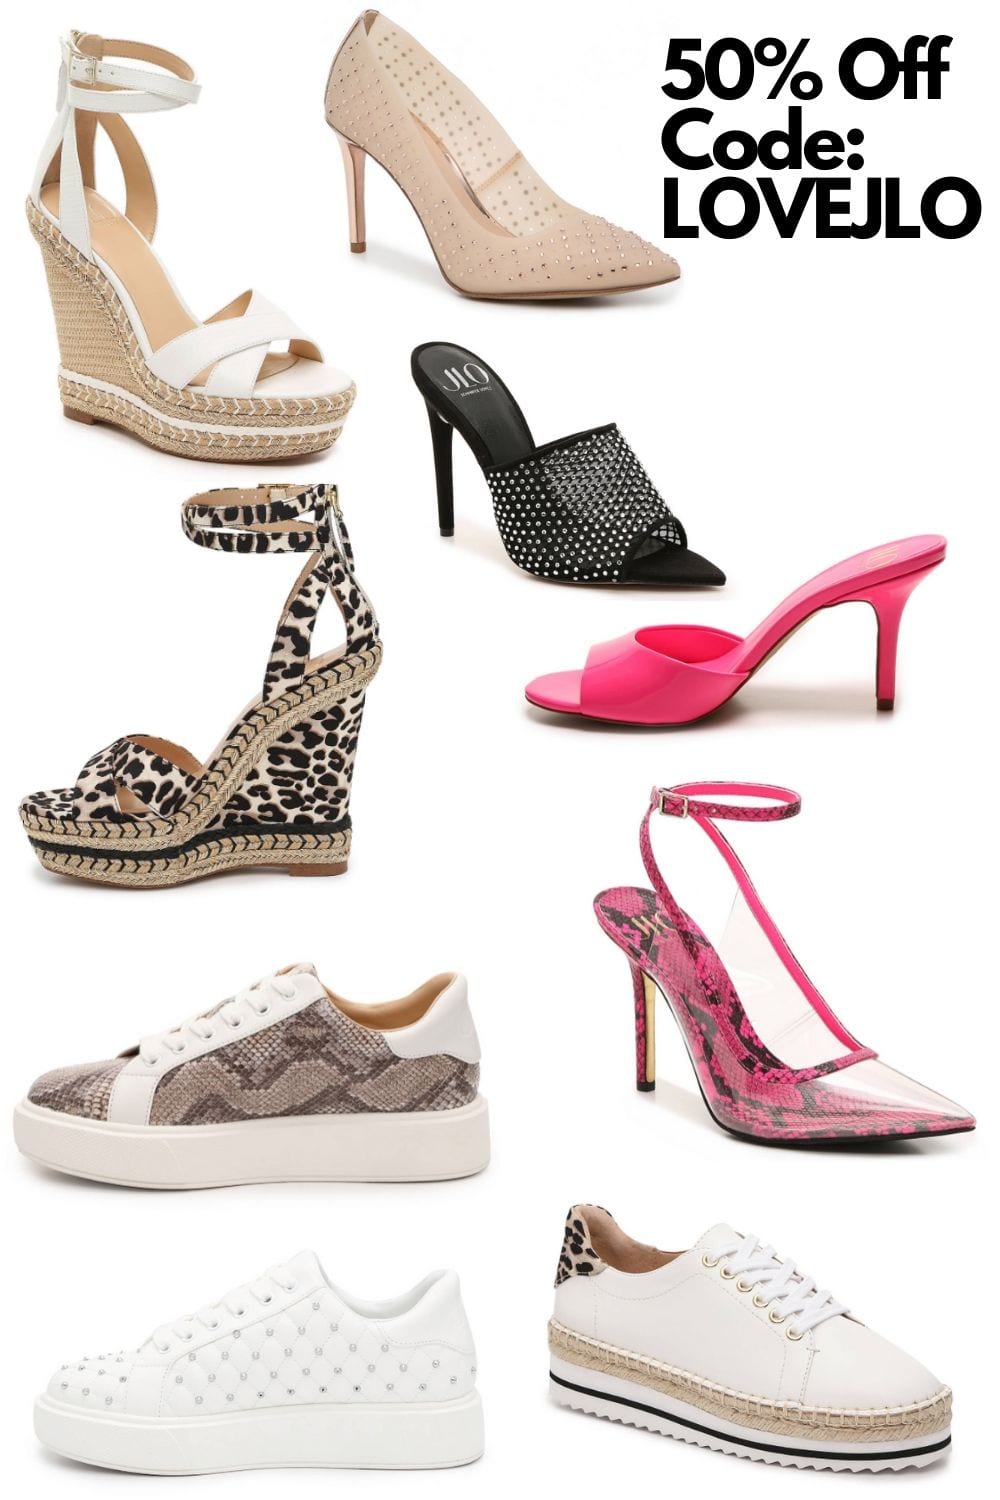 JLO Shoe collection